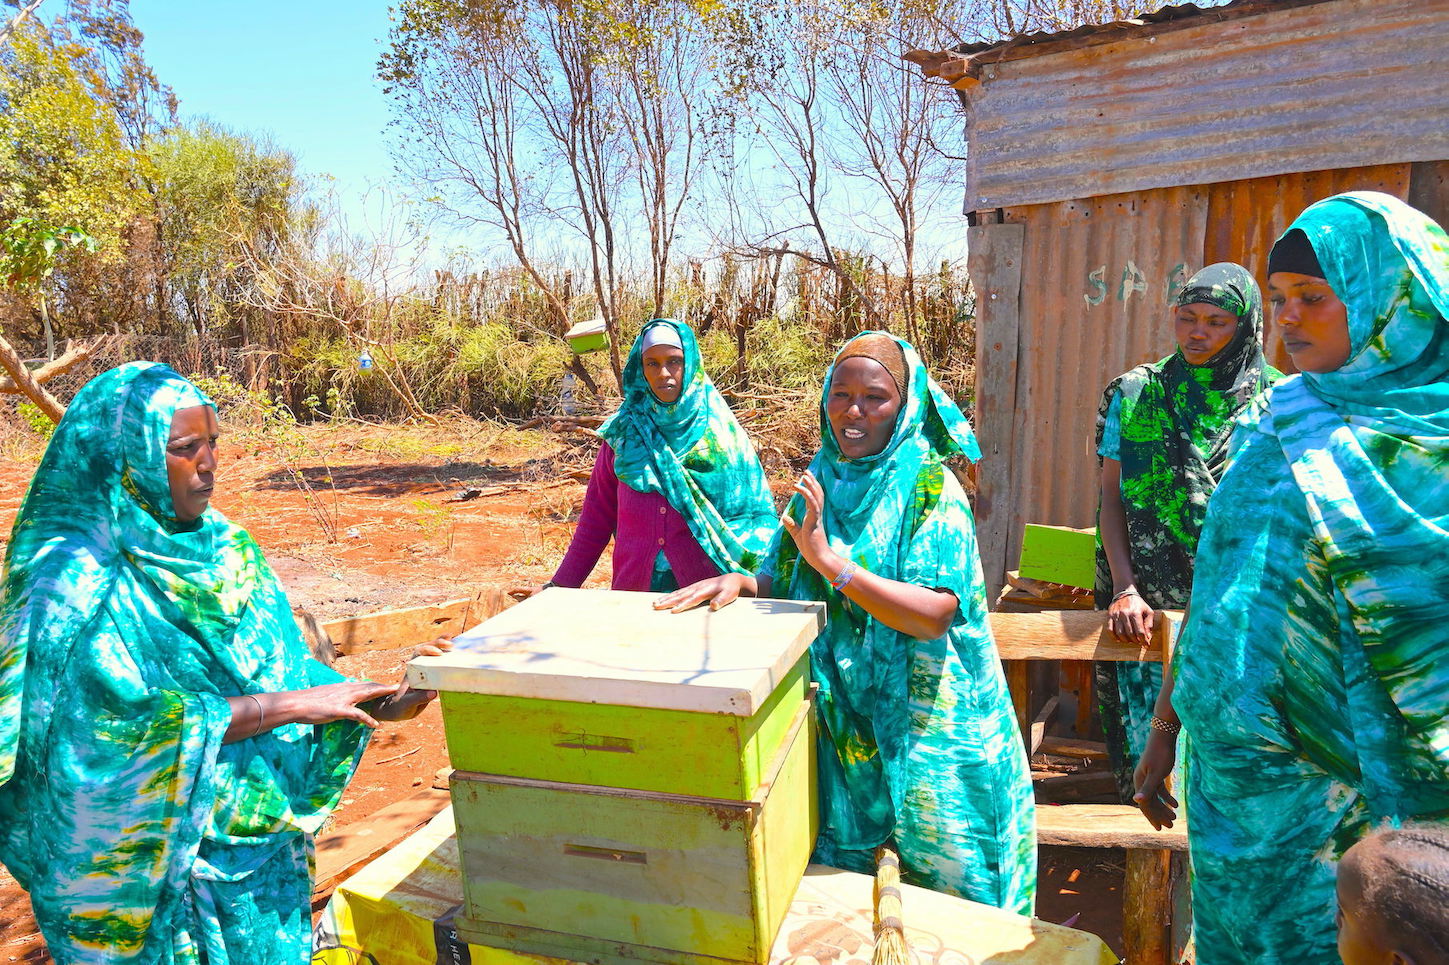 Increased tree cover is enabling women to practice beekeeping which gives them income during dry seasons.